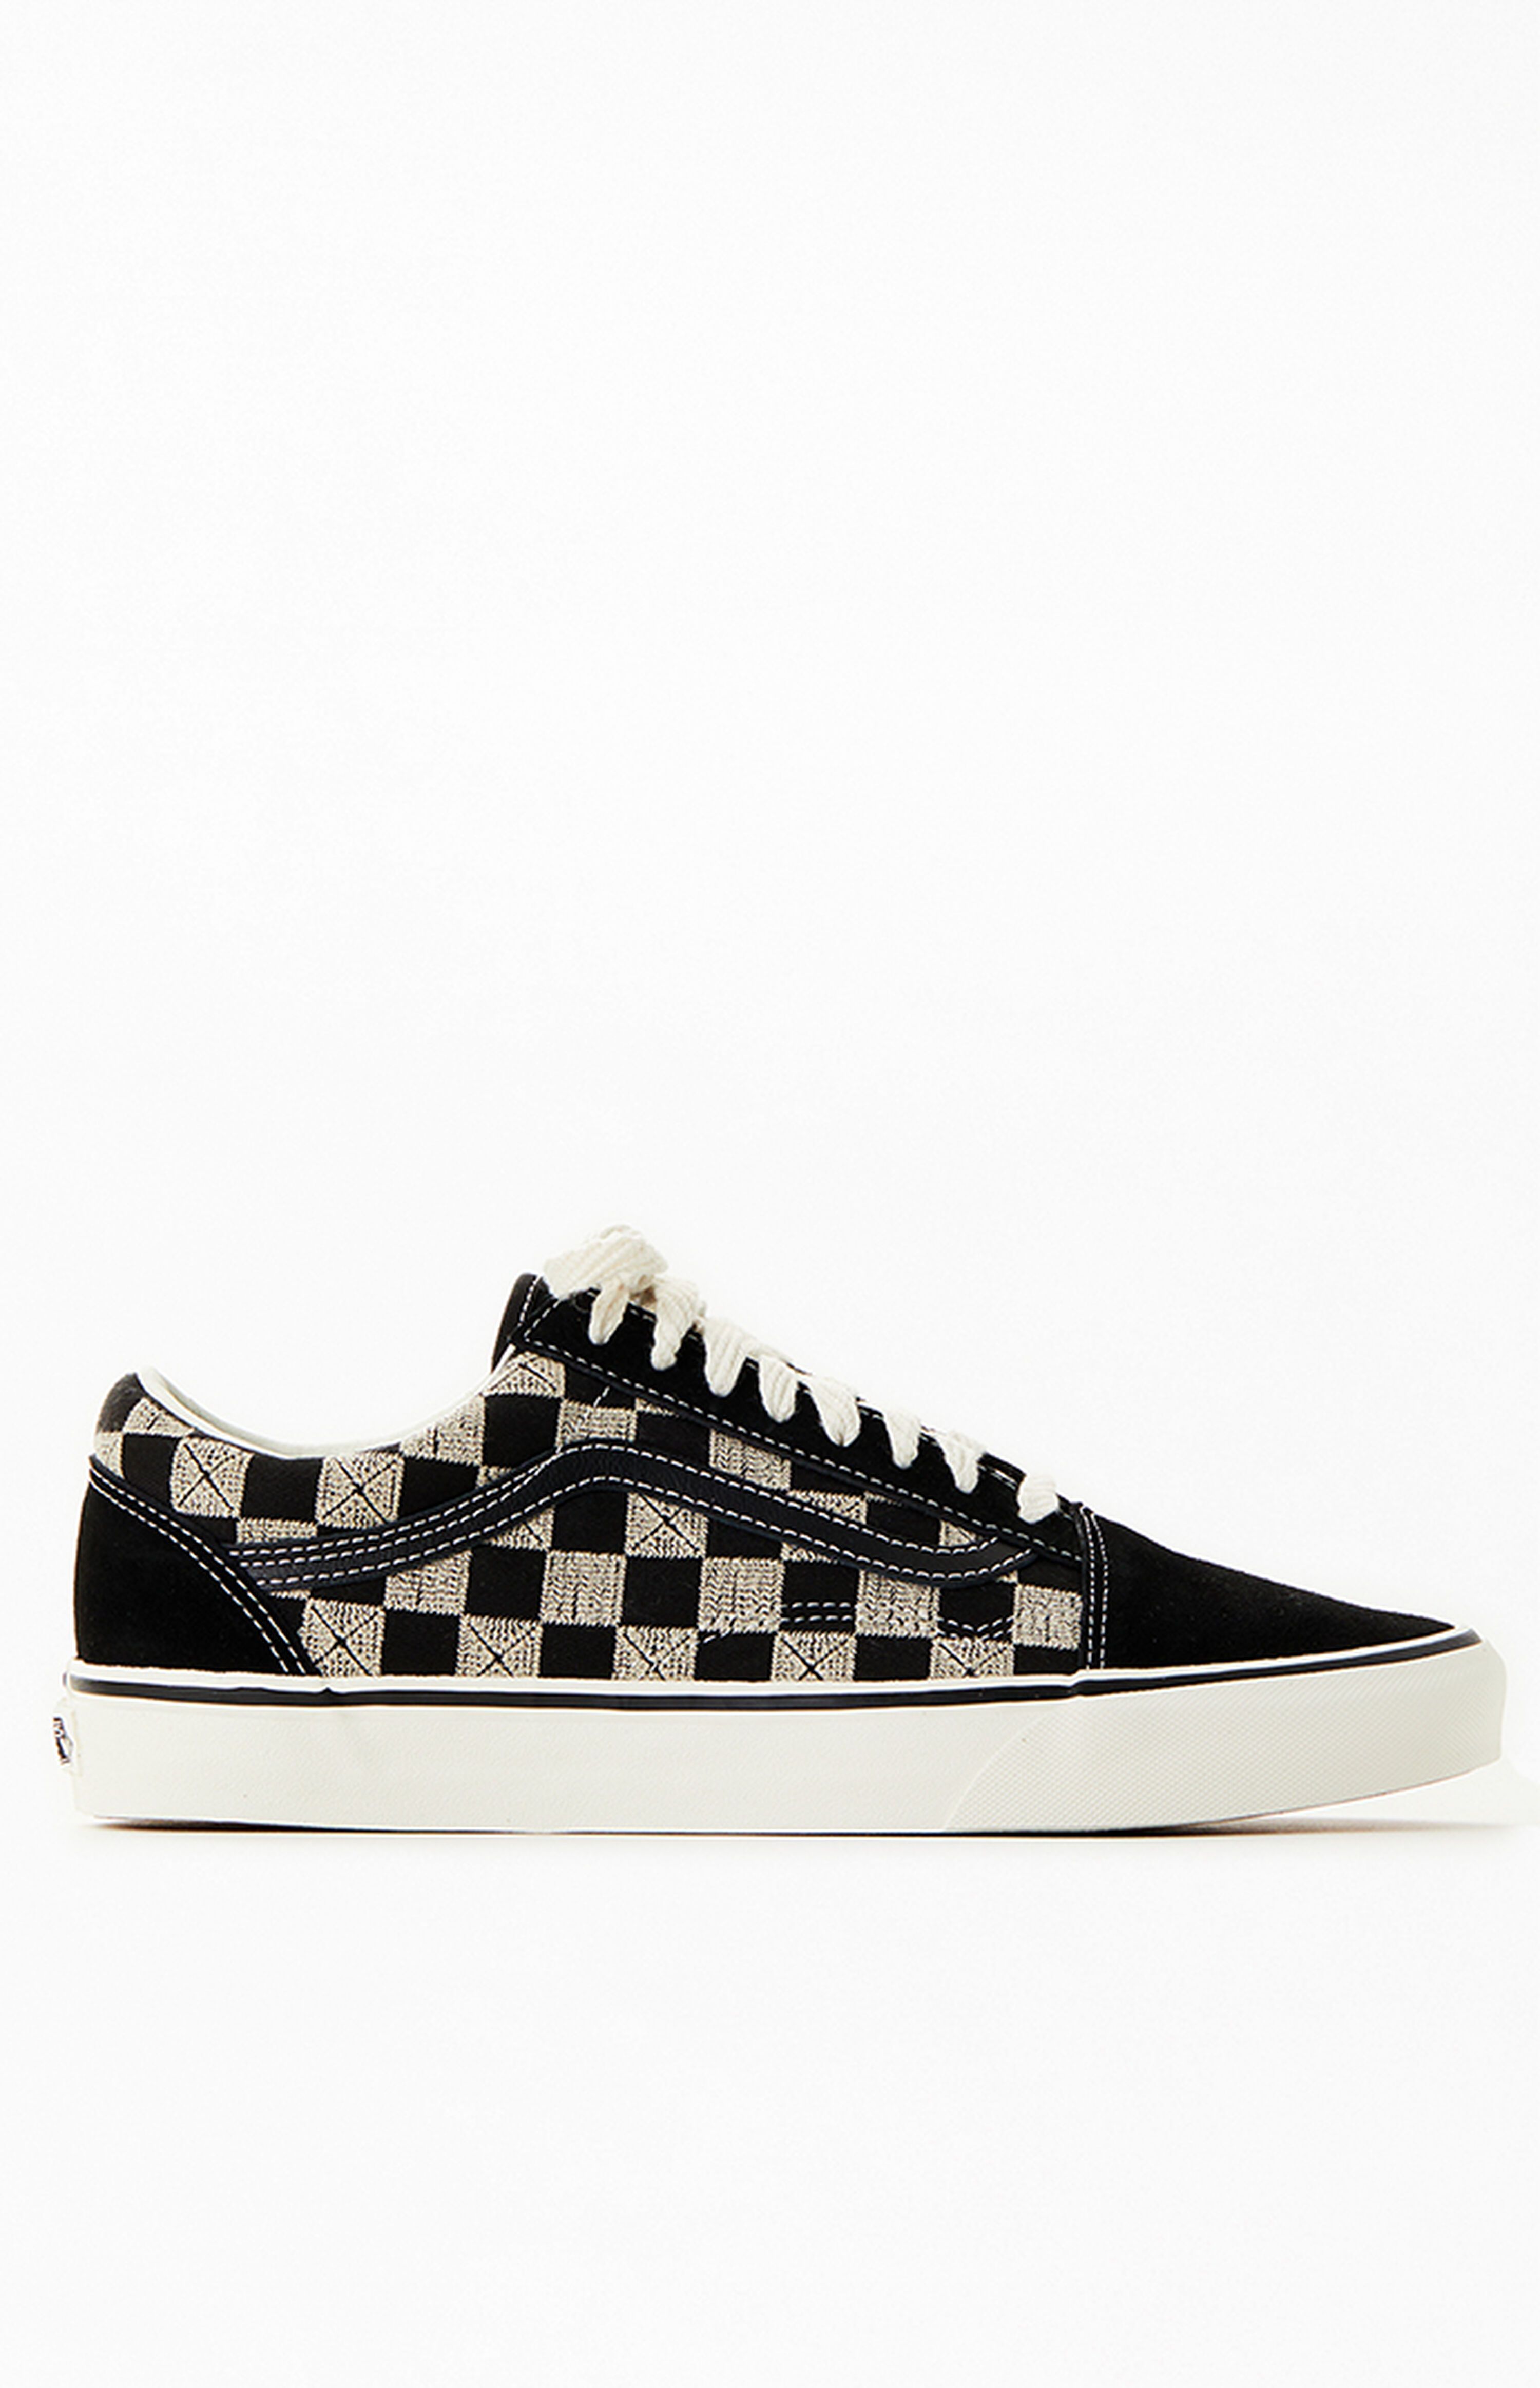 Vans Old Skool Stitch Checkerboard Shoes | PacSun